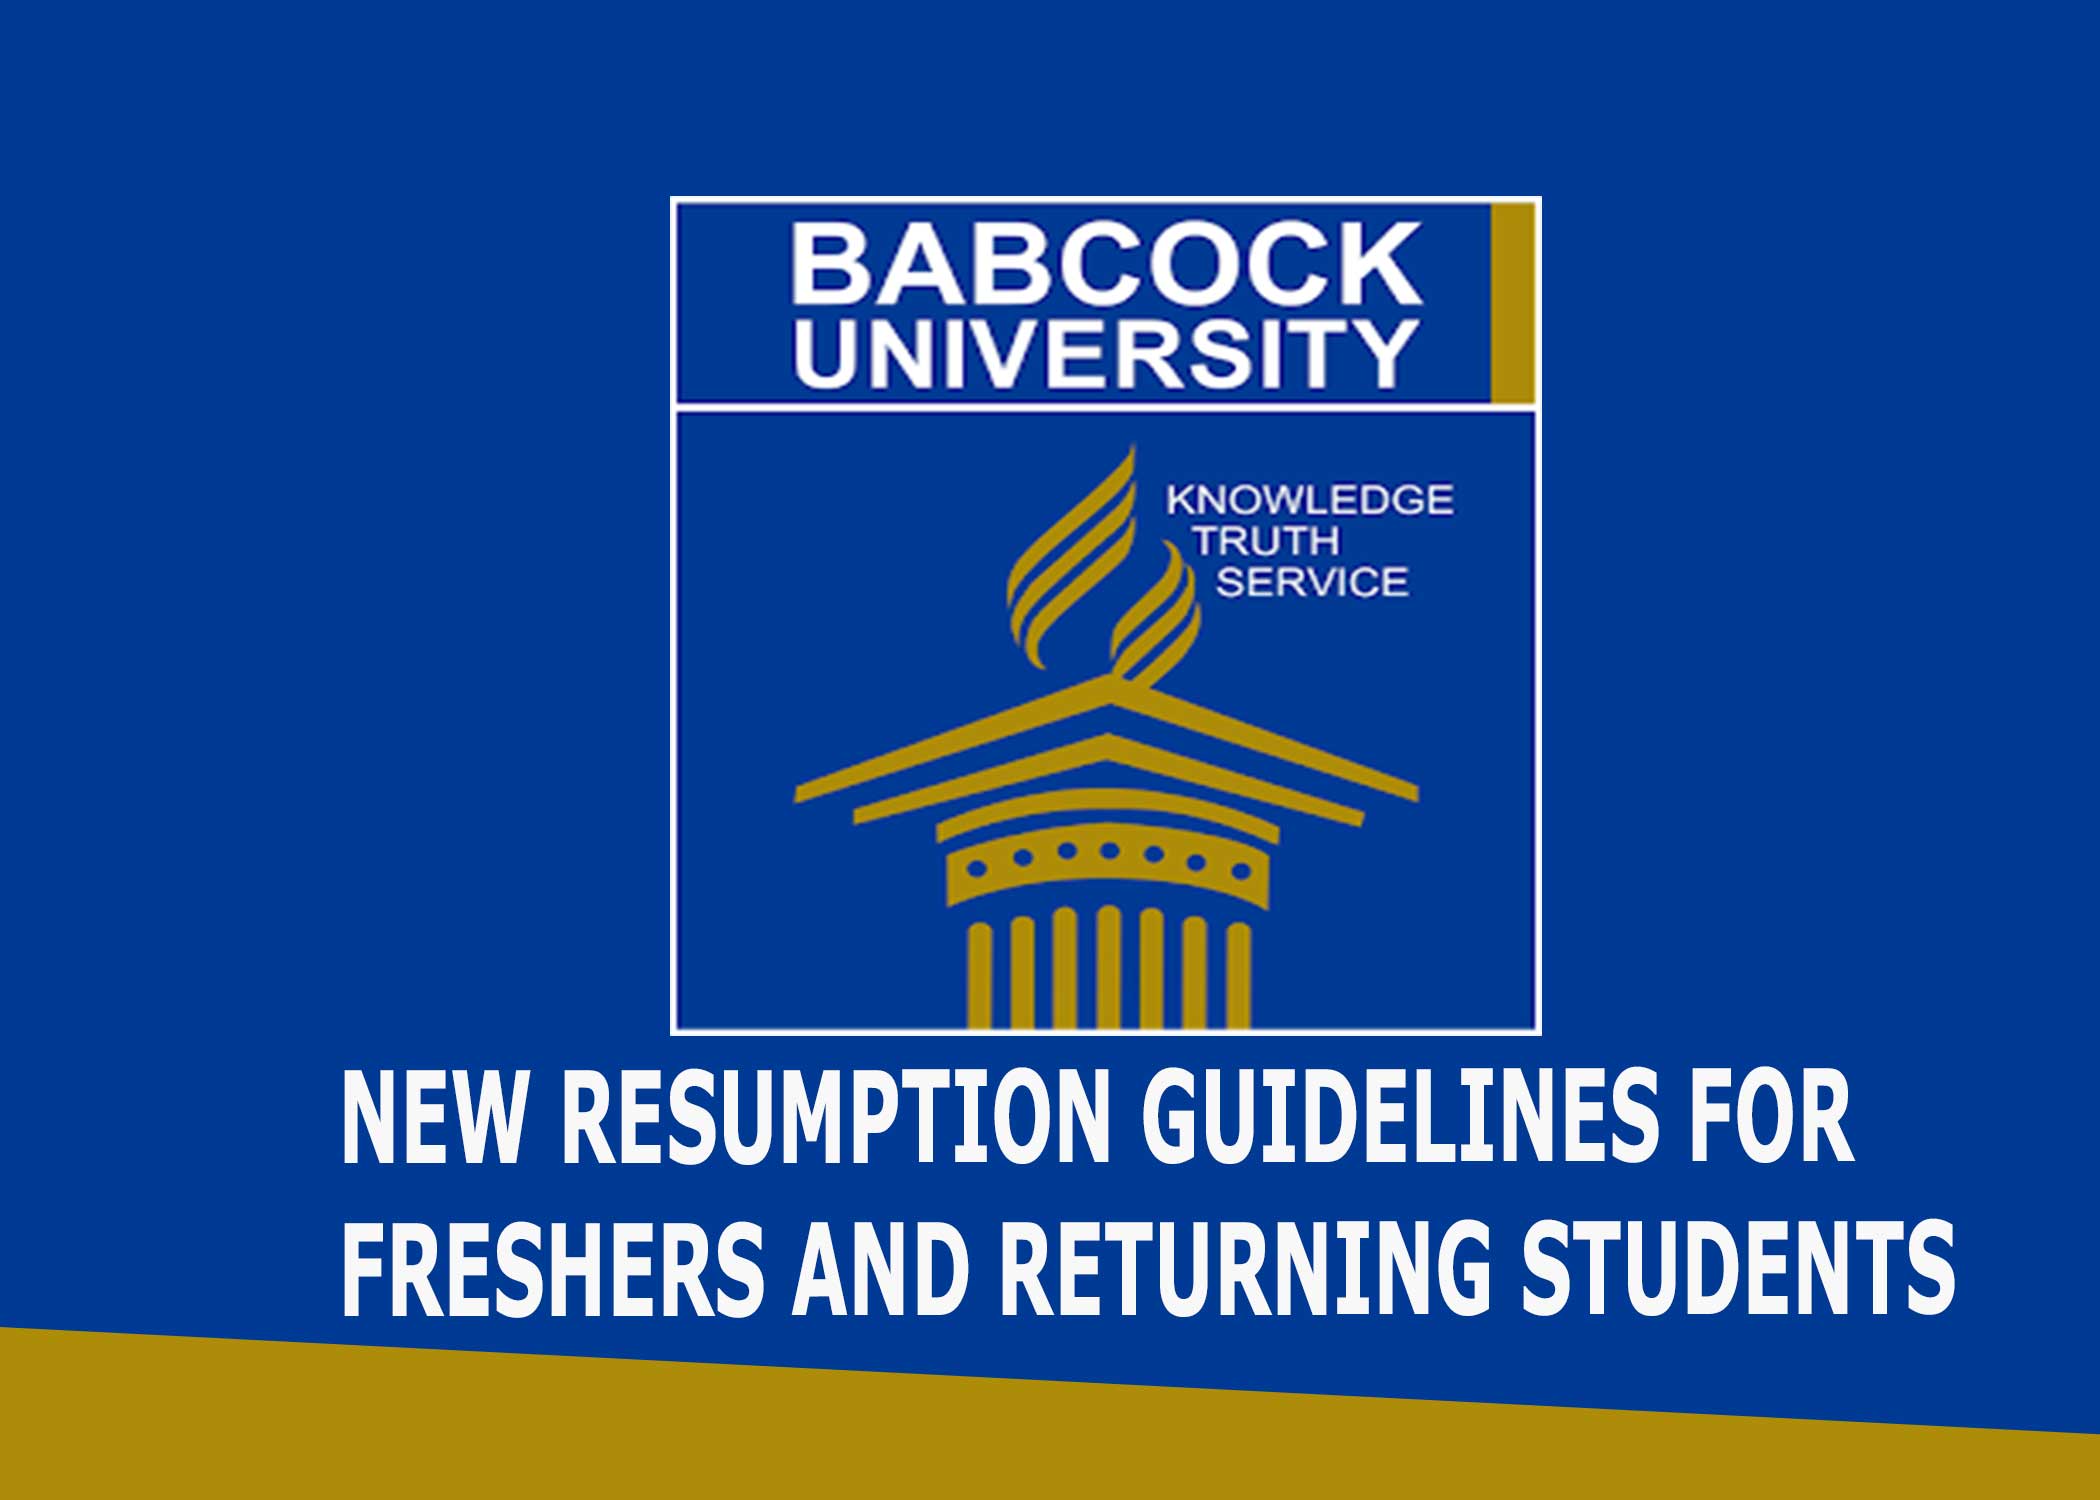 BABCOCK UNIVERSITY COMMUNIQUE ON THE RESUMPTION OF  RETURNING STUDENTS AND FRESH STUDENTS FOR THE 2021/2022  ACADEMIC SESSION 